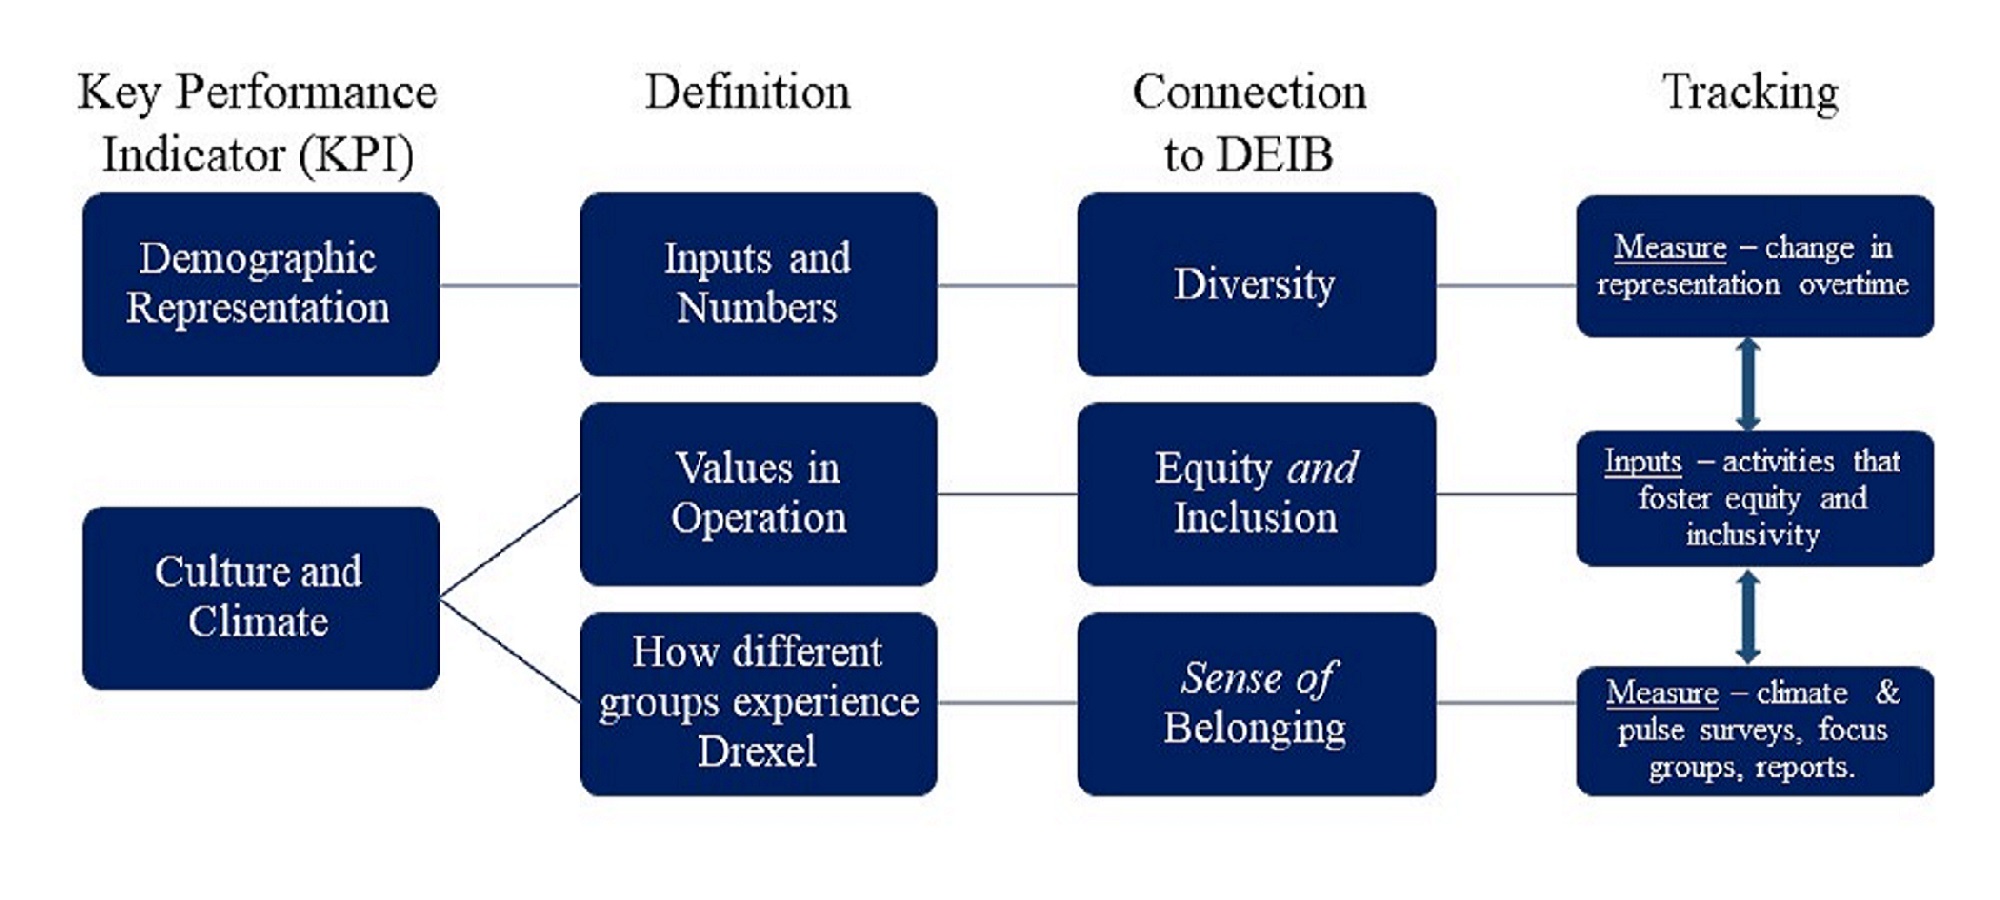 Image of success monitoring framework reflecting demographic representation and culture and climate with definitions, connection to diversity, equity, inclusion and belonging, and tracking methods.